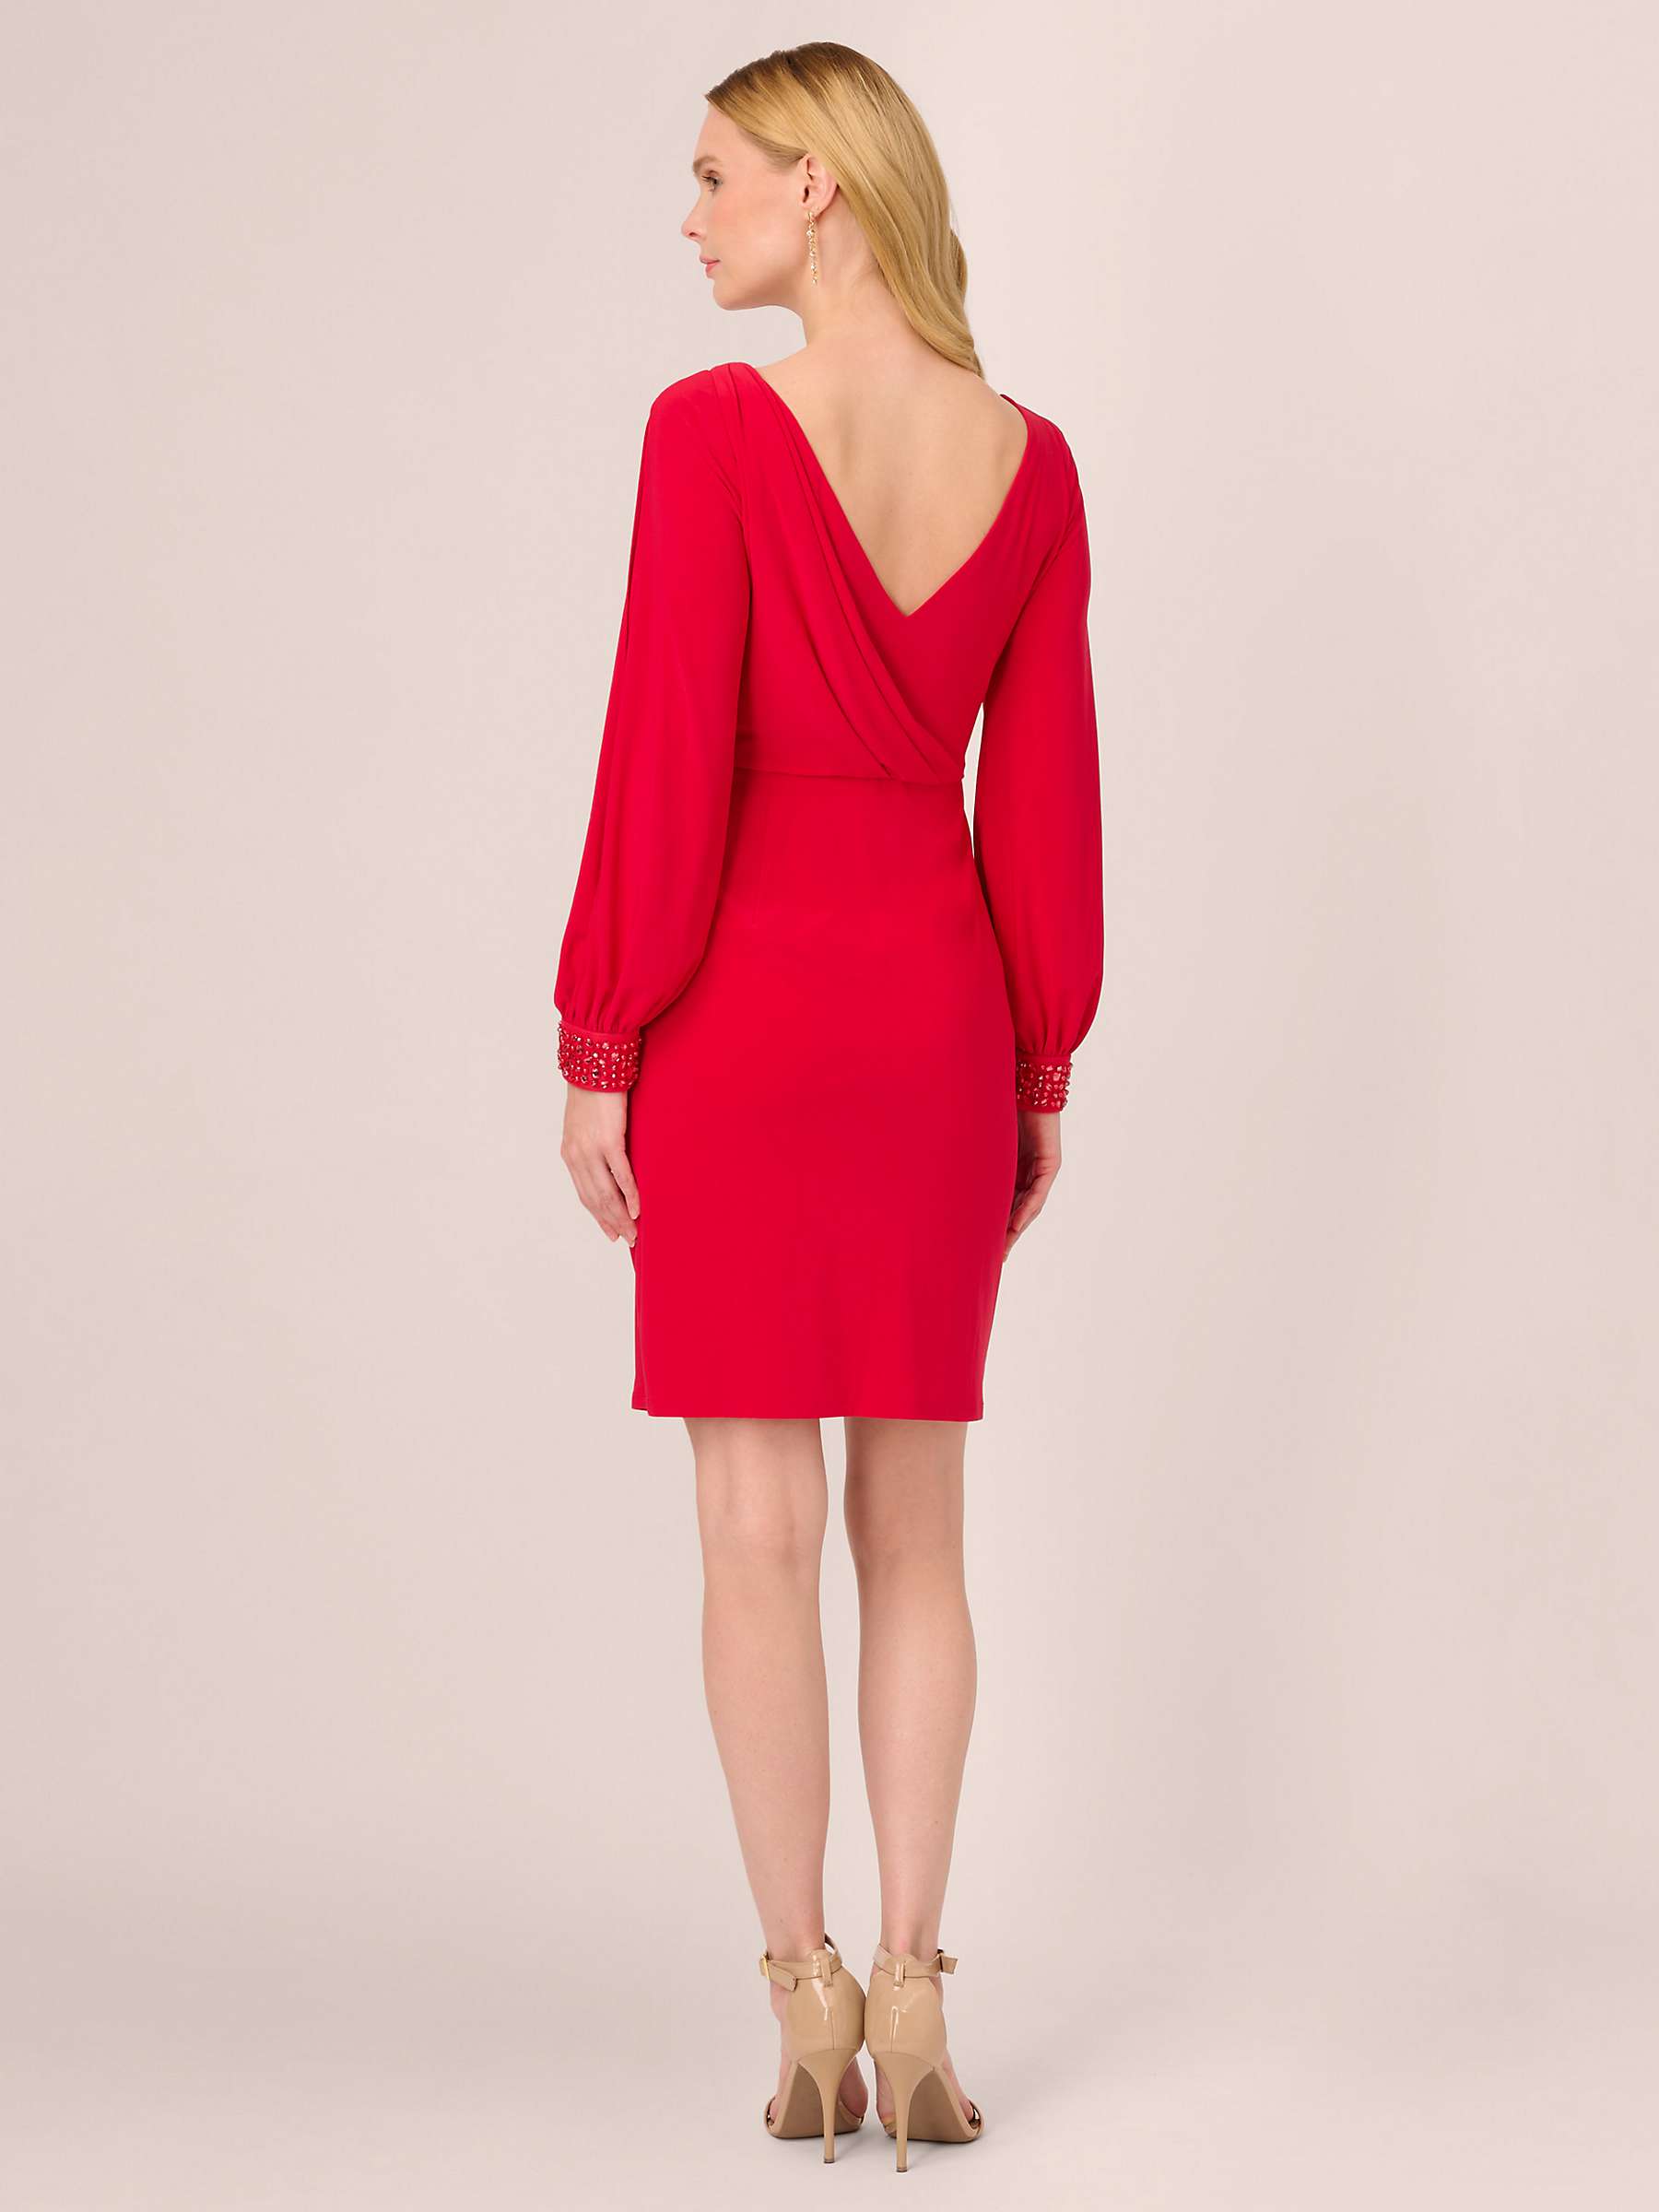 Buy Adrianna Papell Beaded Cuff Short Jersey Dress, Hot Ruby Online at johnlewis.com